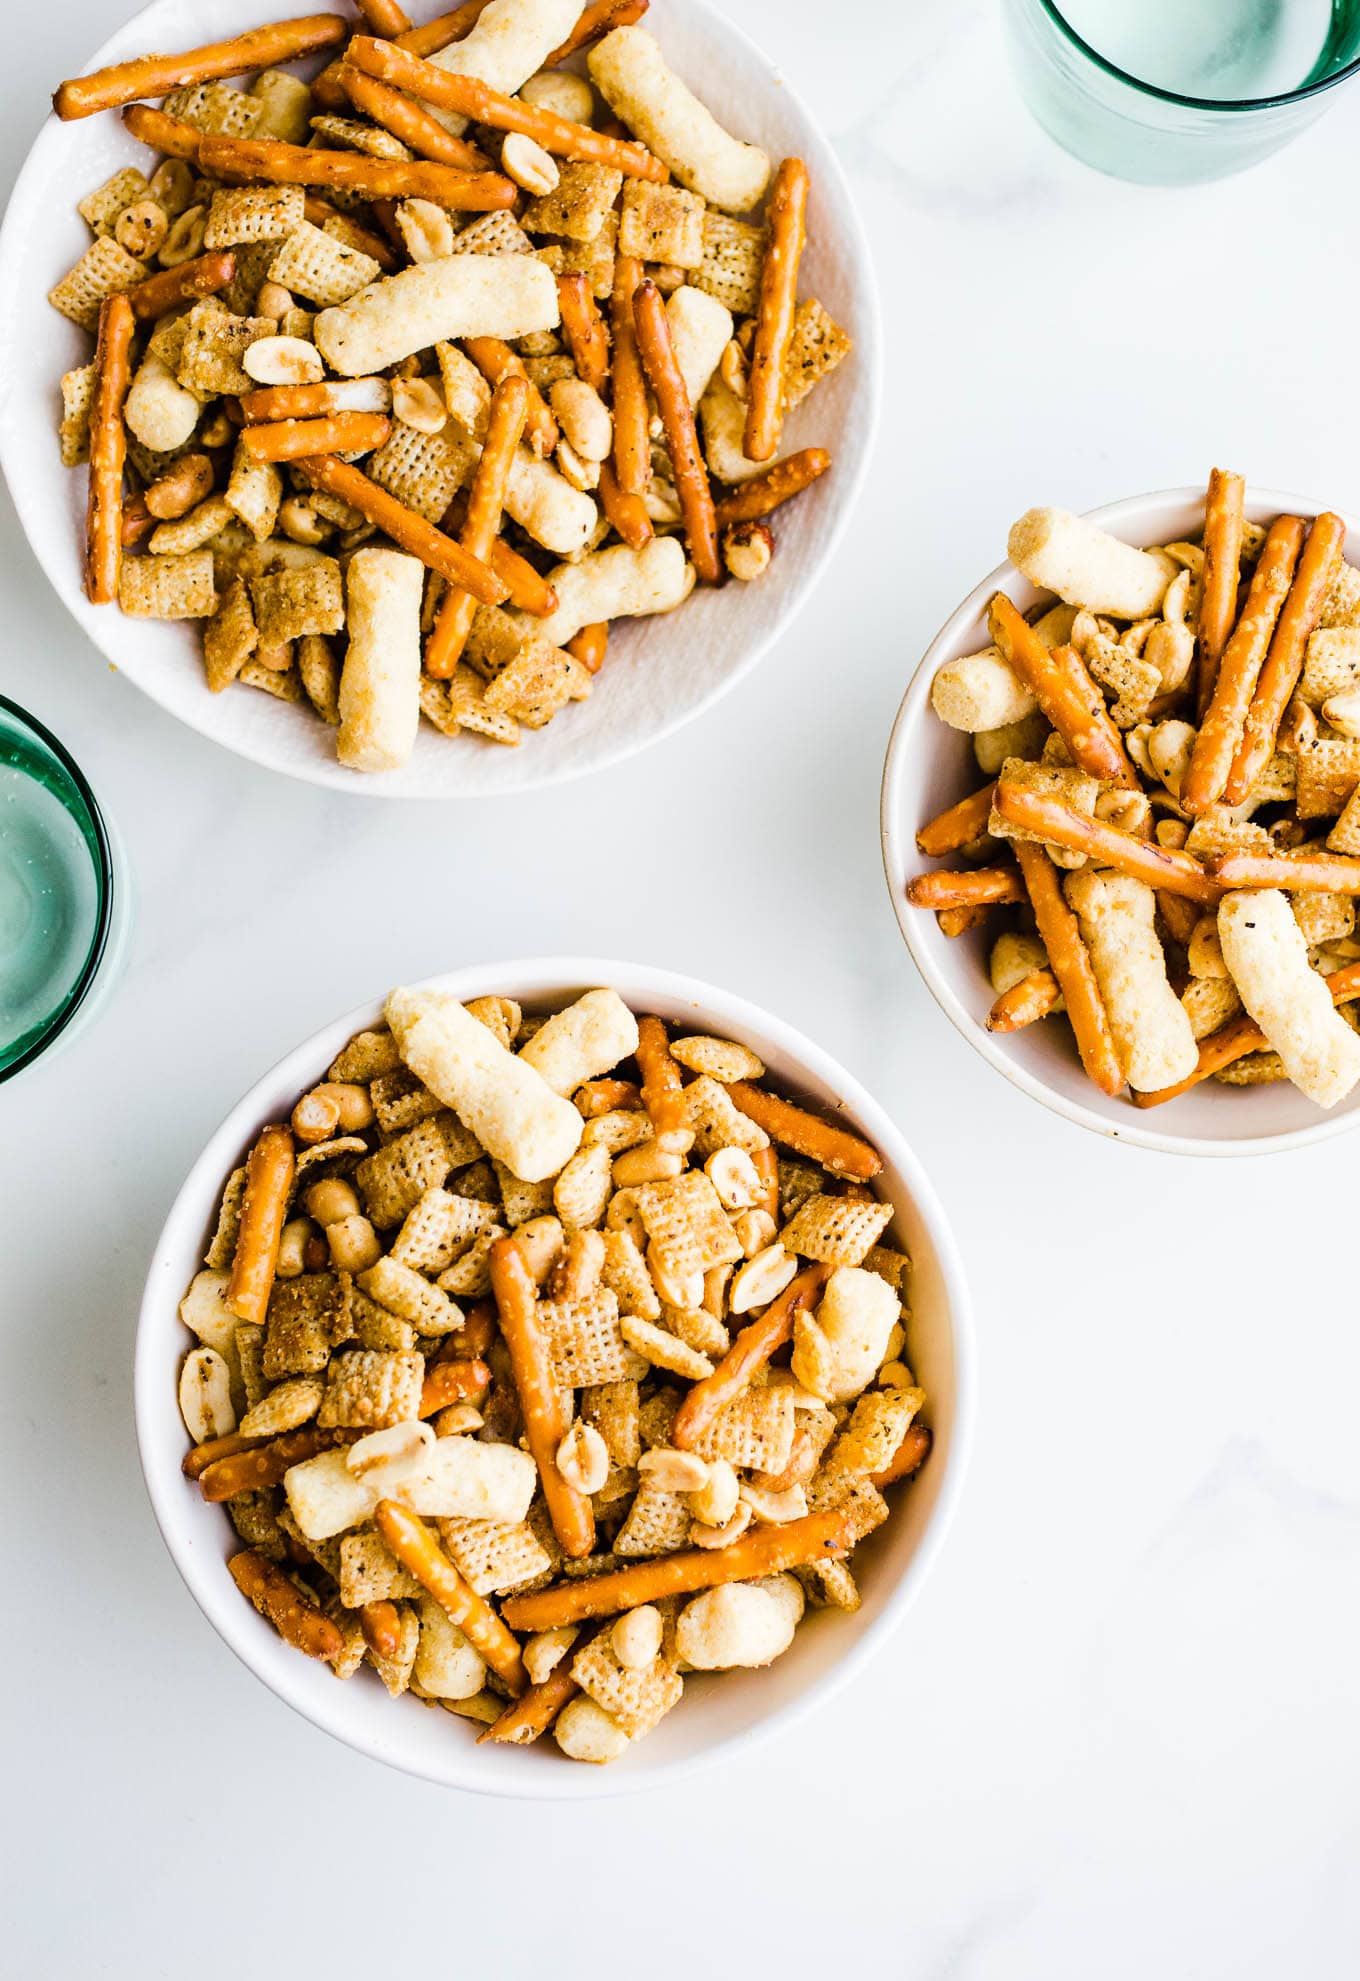 Pretzels, peanuts, cheese puffs, and Chex in three white bowls to serve gluten-free dairy-free snacks.